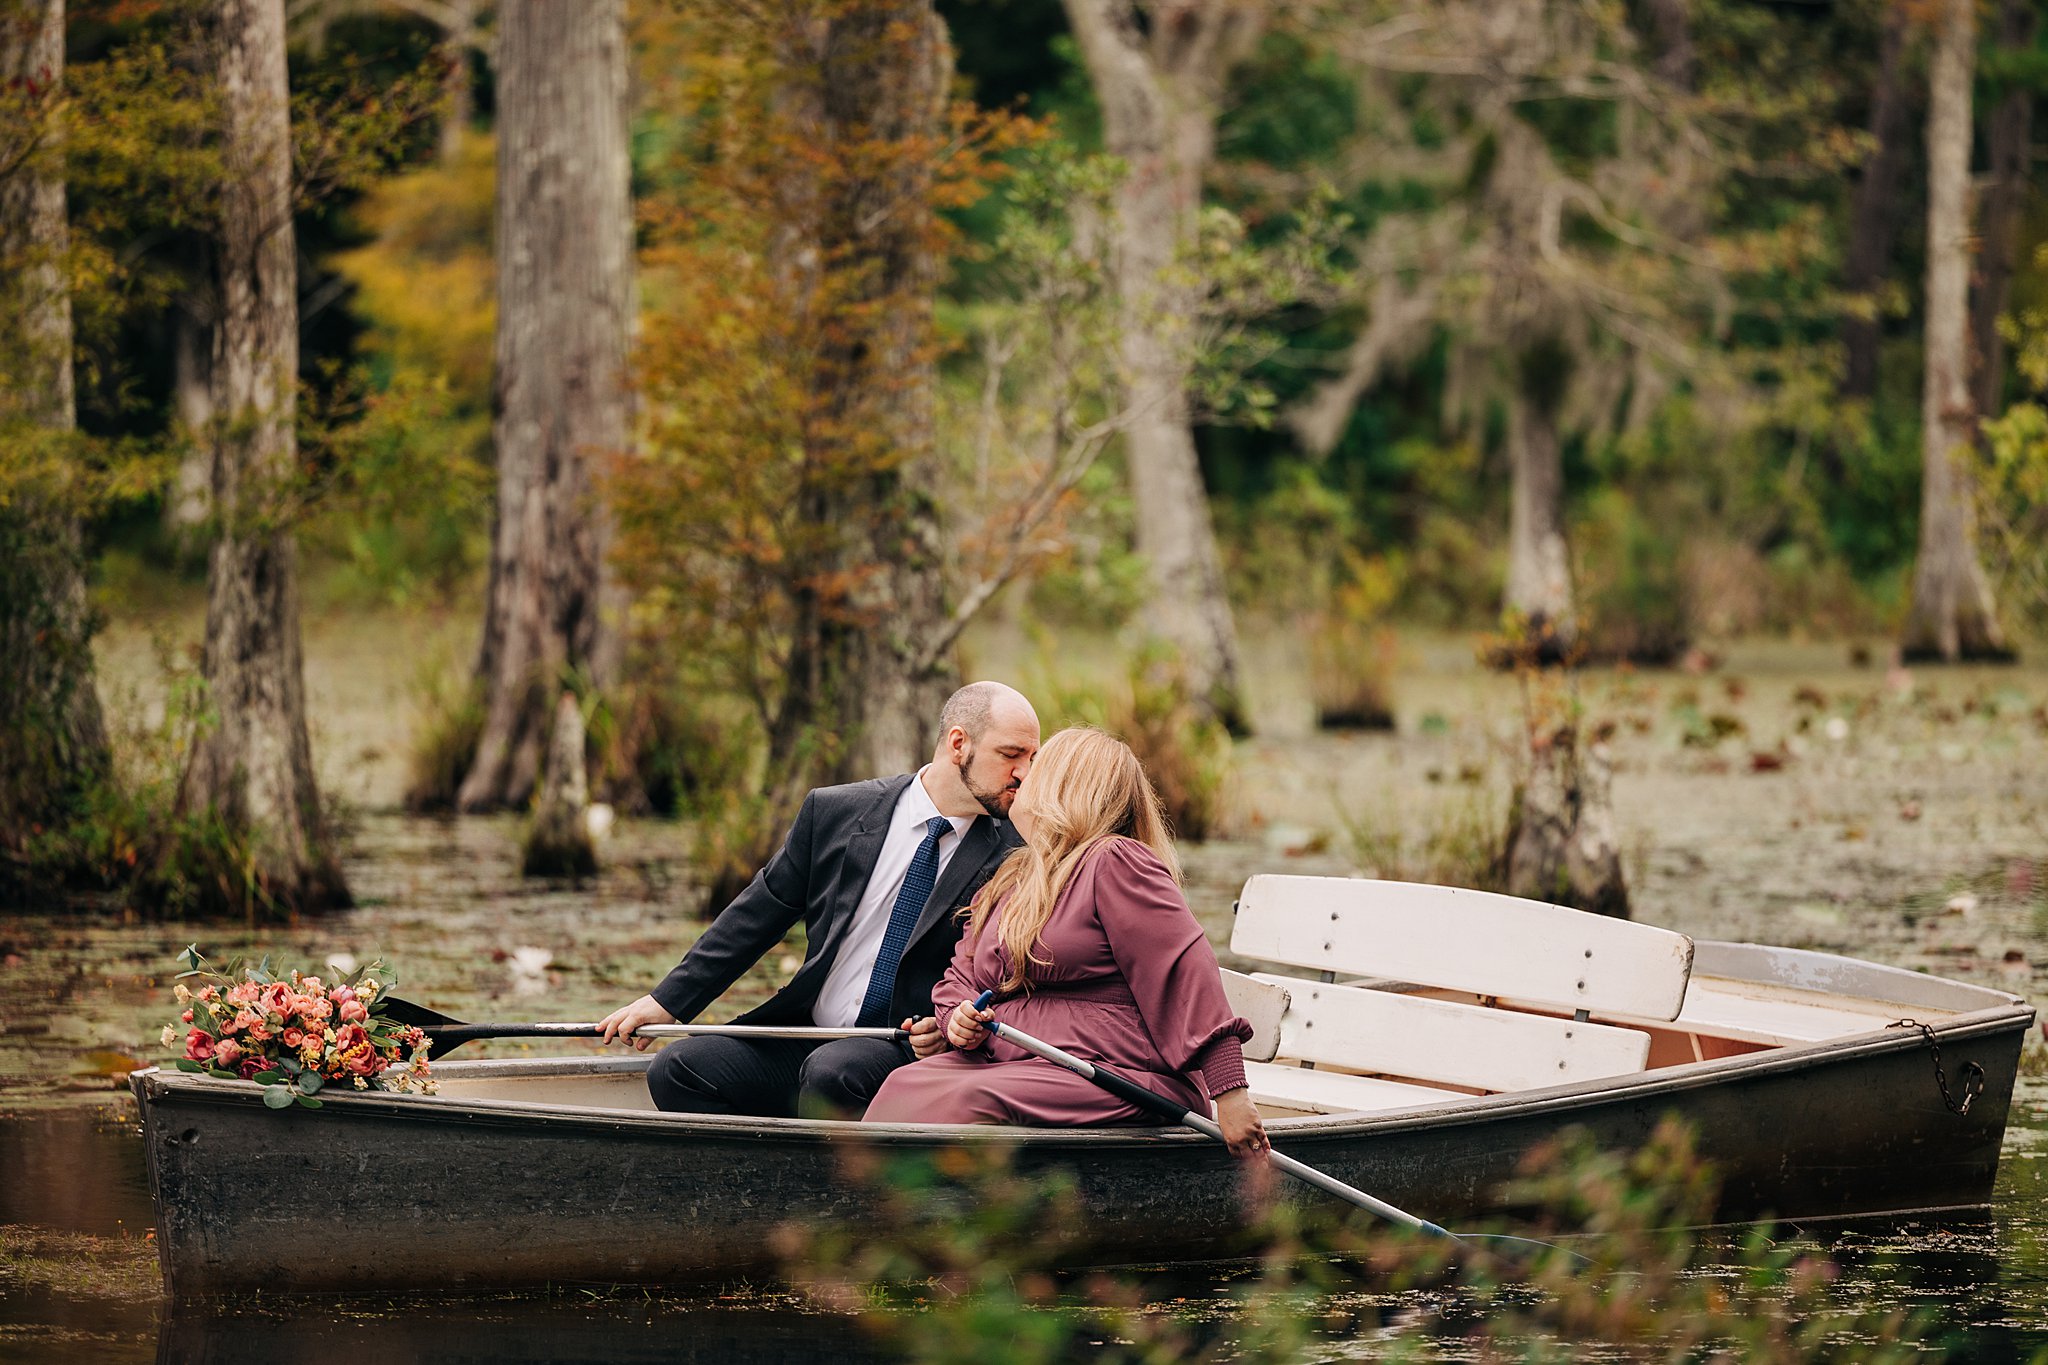 A newly engaged couple kiss mid paddle while in a boat celebrating their cypress gardens wedding engagement